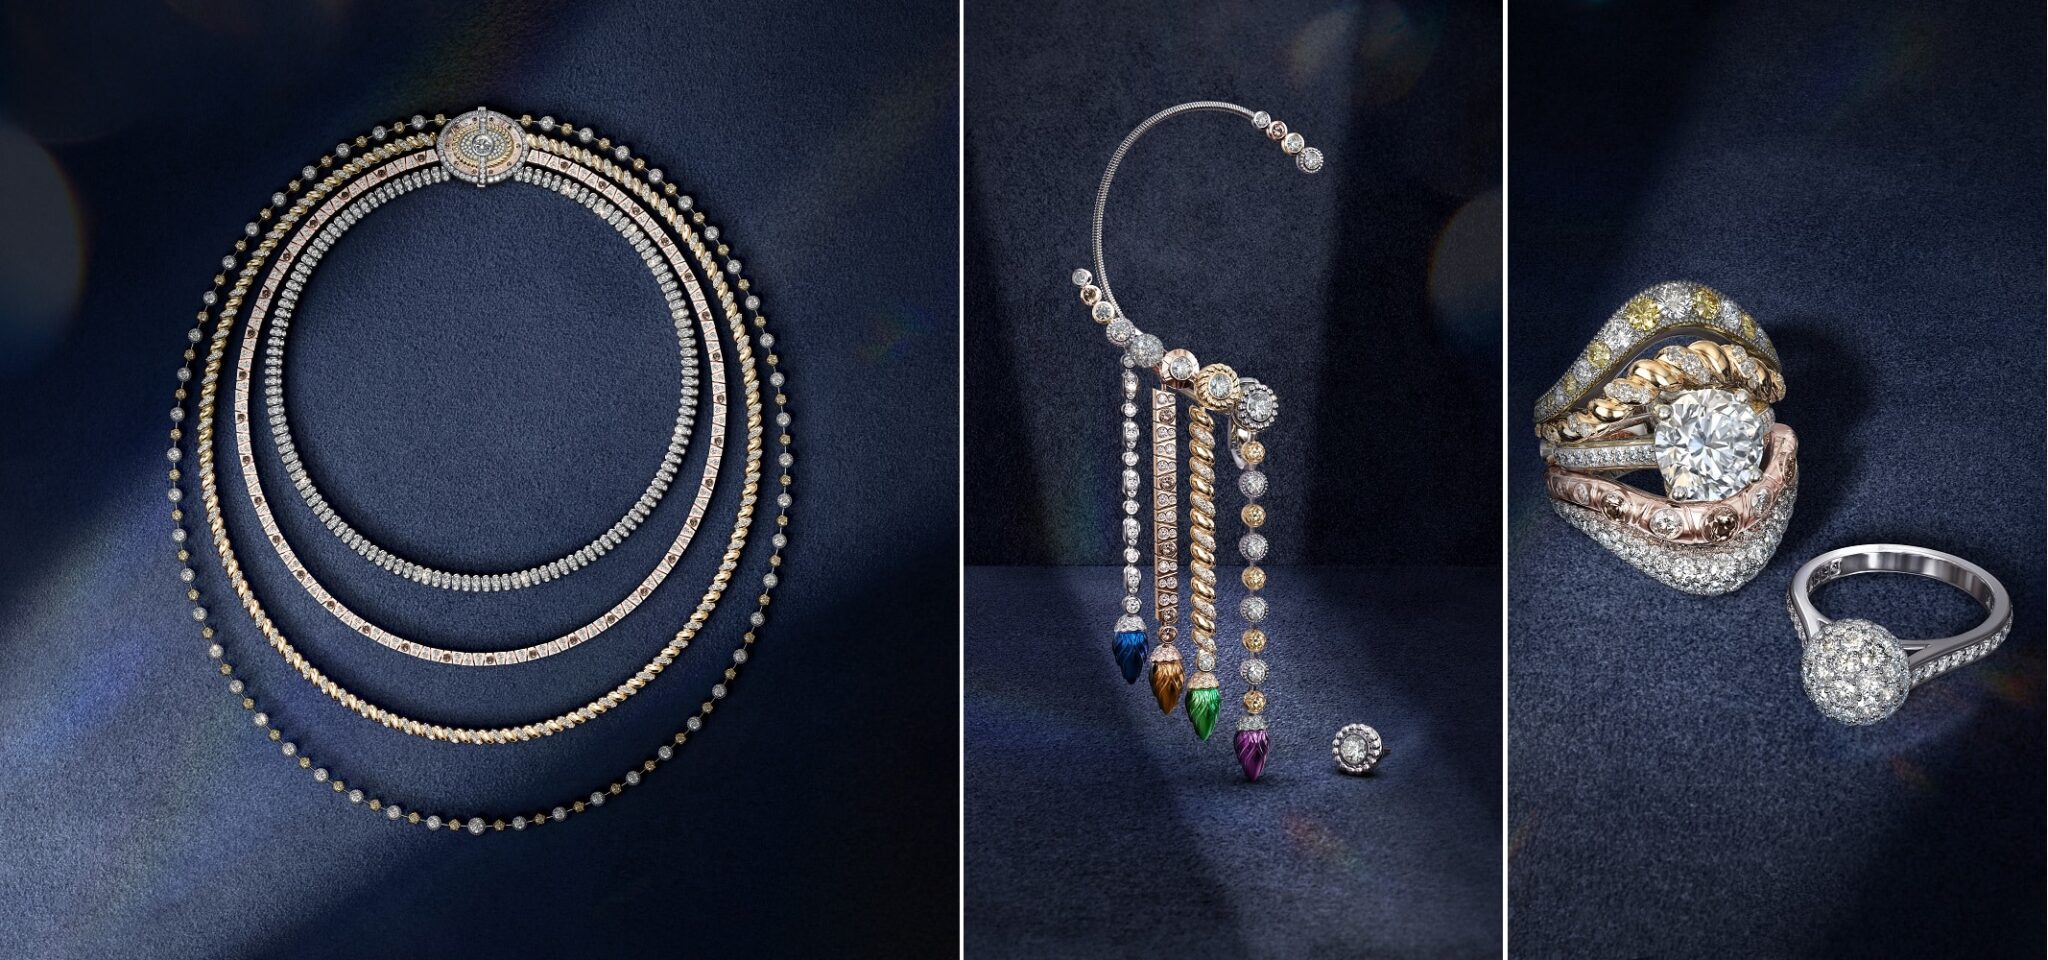 De Beers Group and Couture celebrate diversity in fine jewelry at New York  event